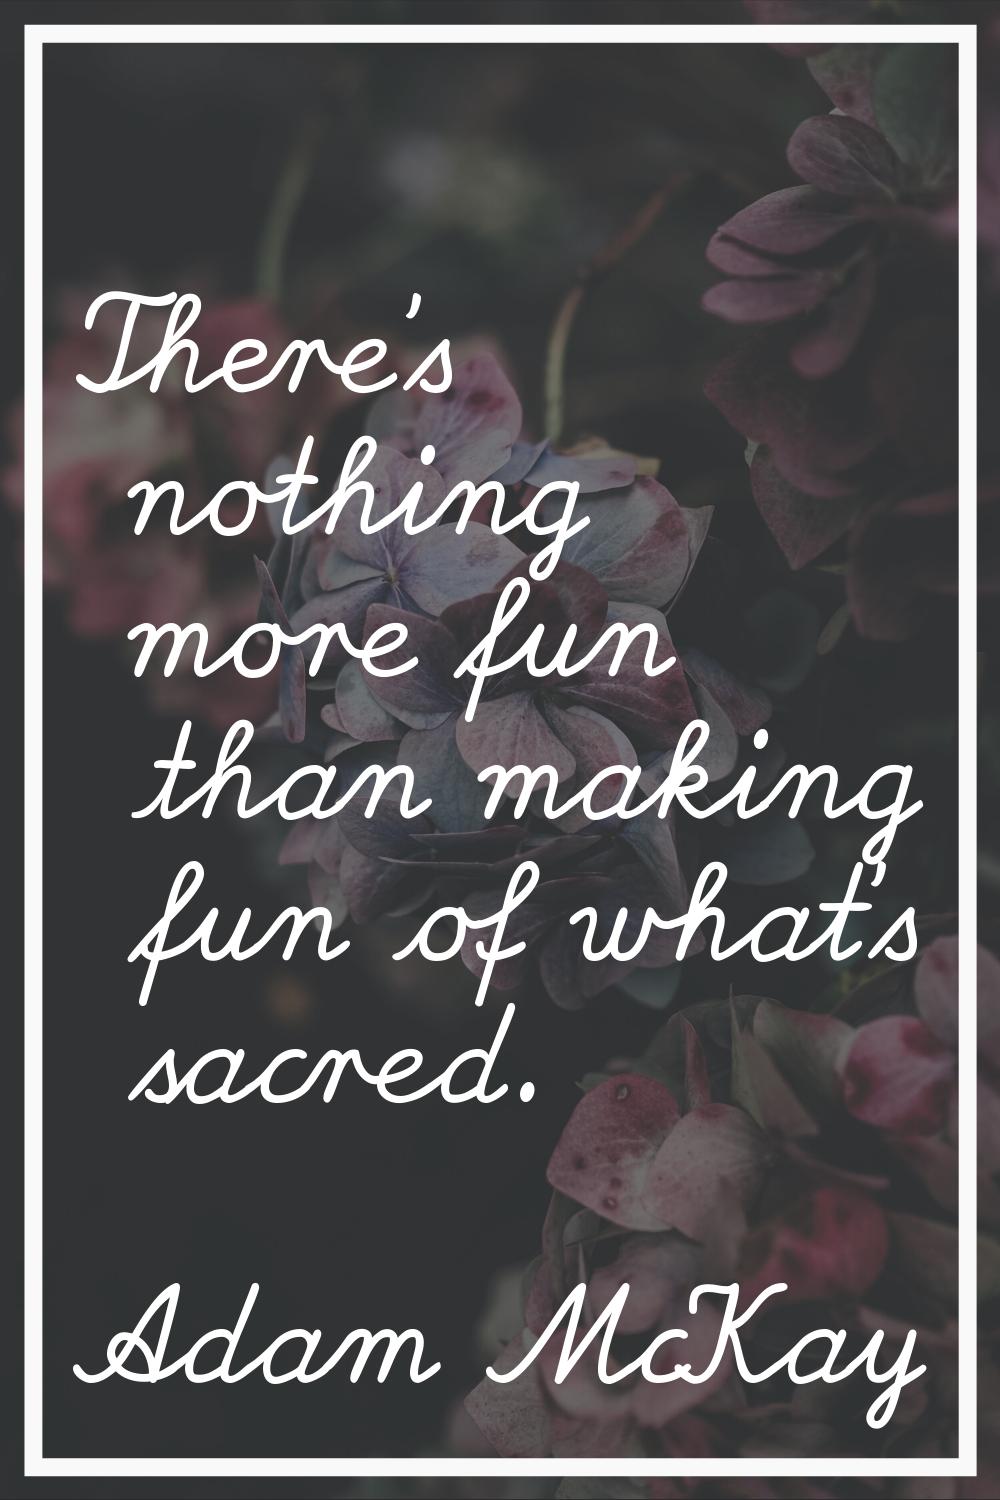 There's nothing more fun than making fun of what's sacred.